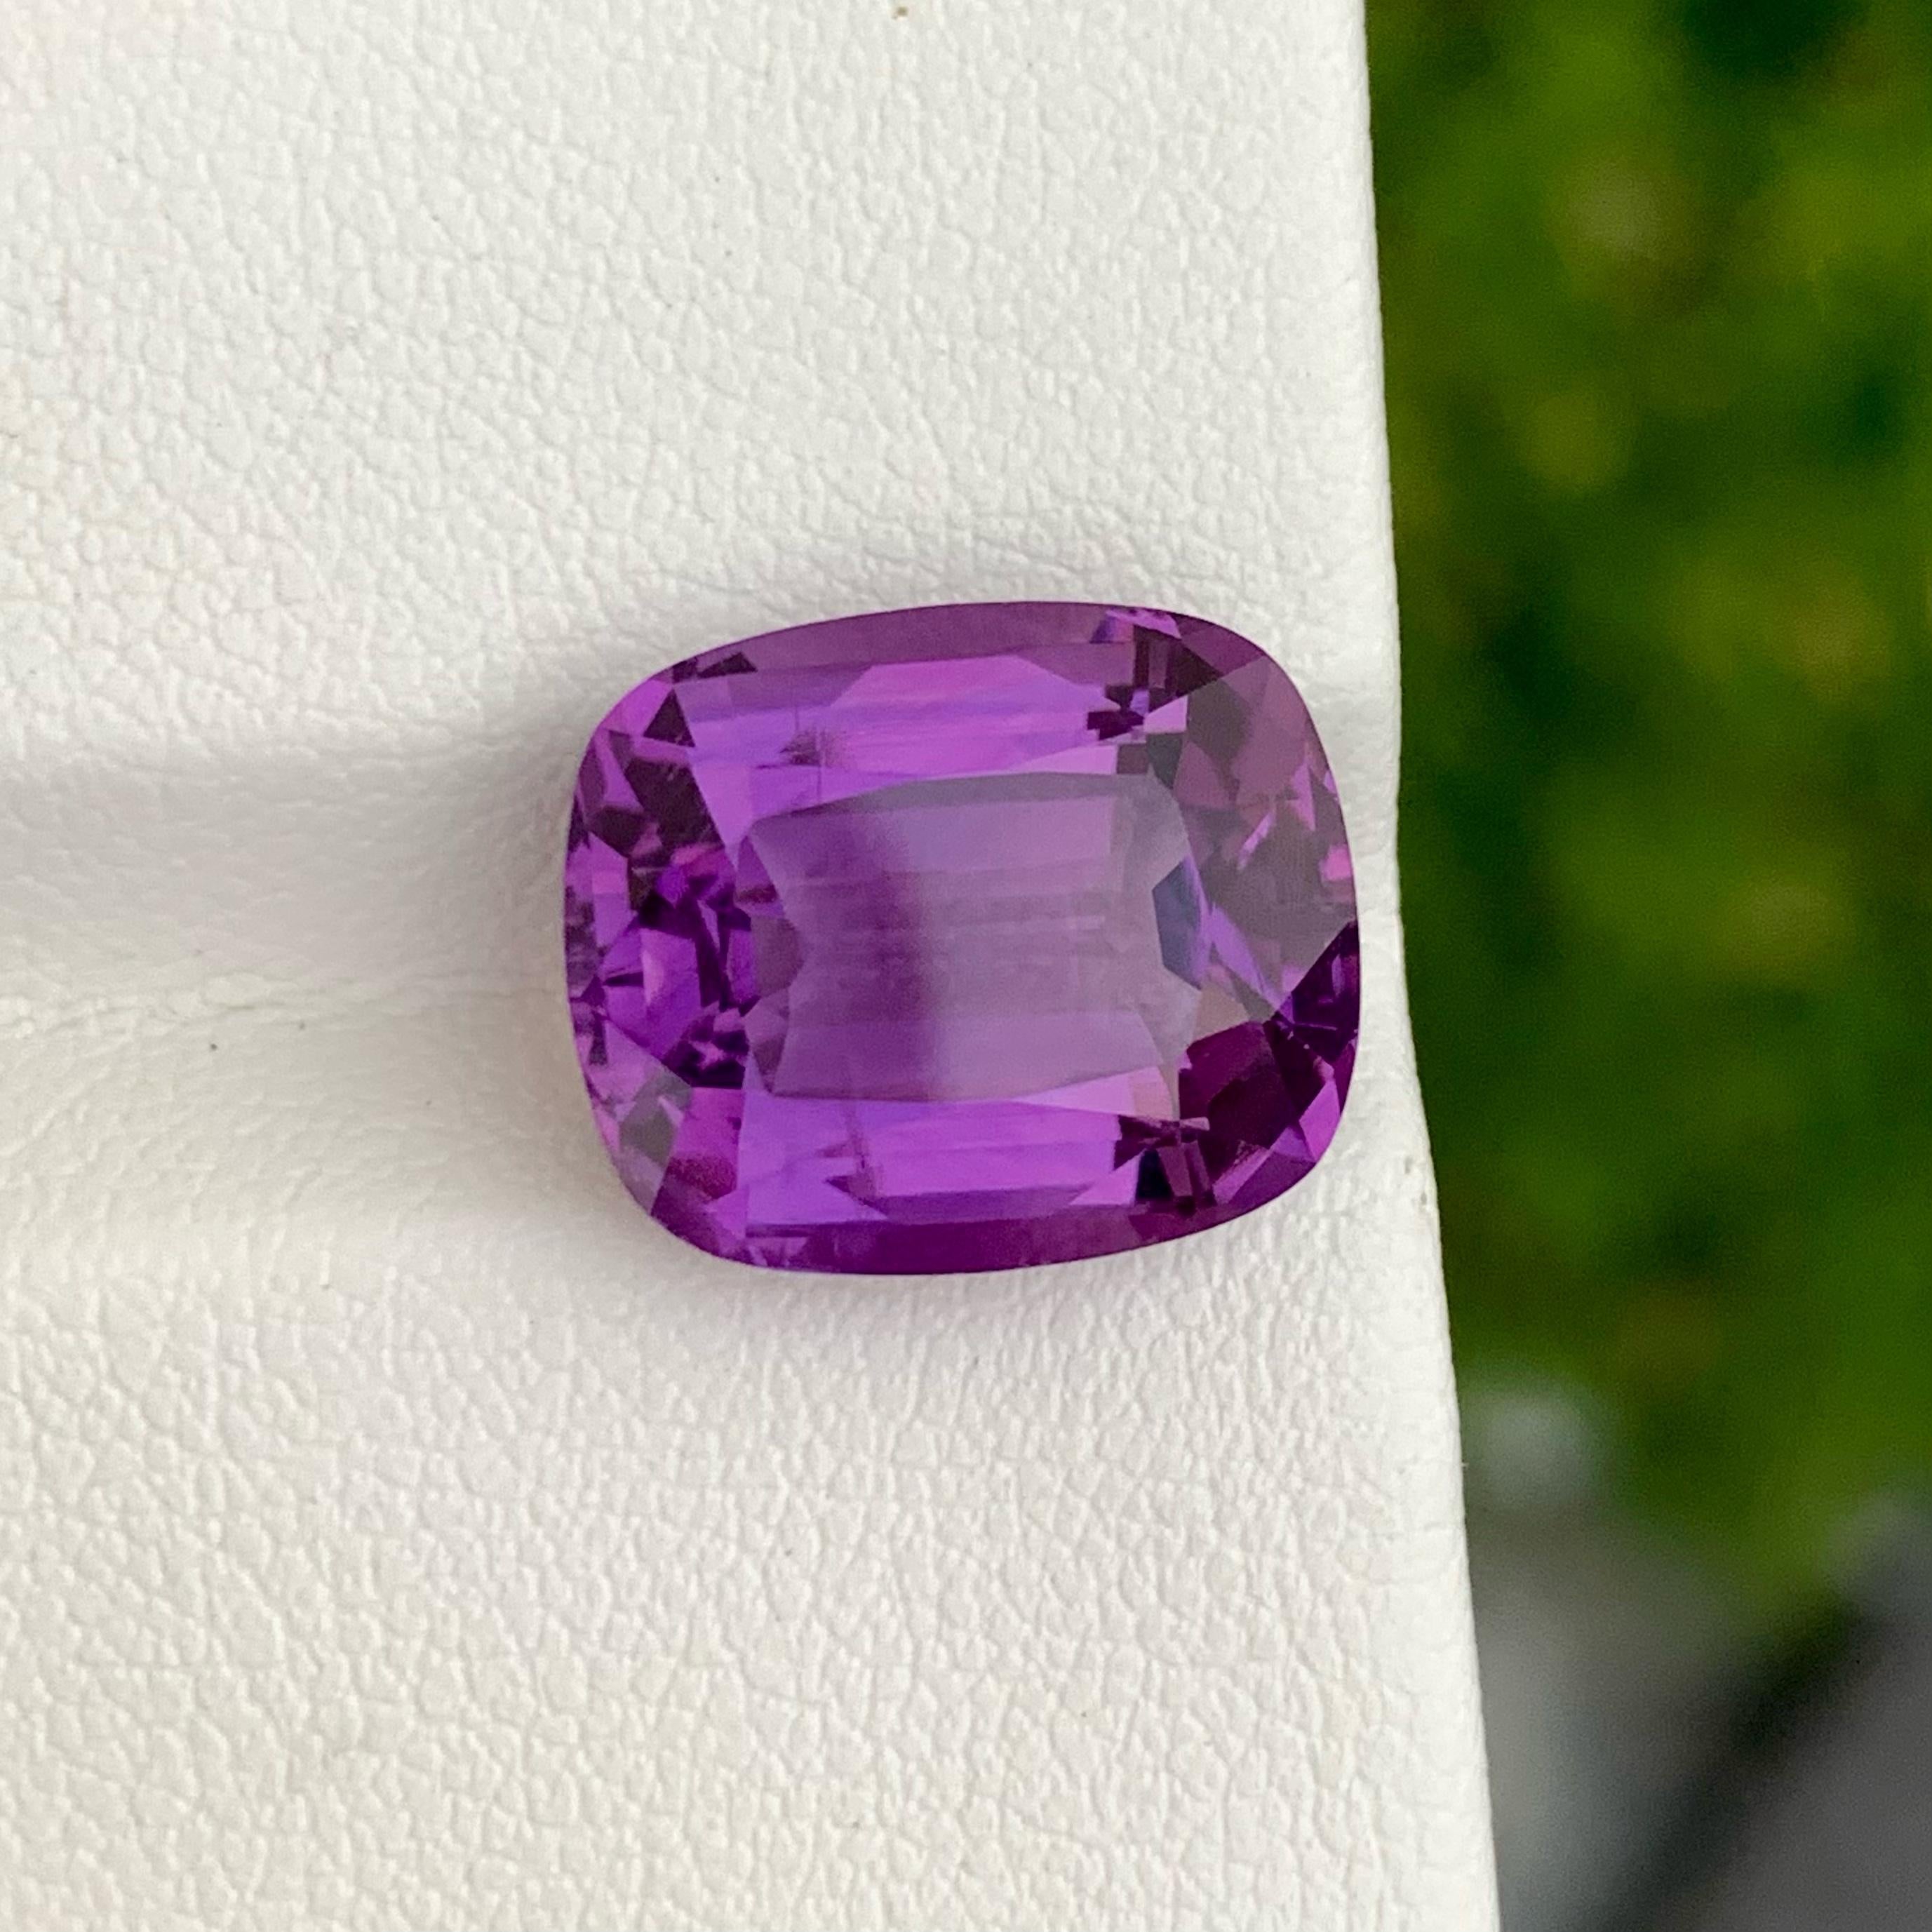 Weight 8.70 carats 
Dimension 14.5 x 12.1 x 7.7 mm
Treatment None 
Origin Brazil 
Clarity Eye Clean 
Shape Cushion 
Cut Fancy Cushion


The Purple Amethyst Stone is believed to possess powerful healing properties, bringing balance and serenity to